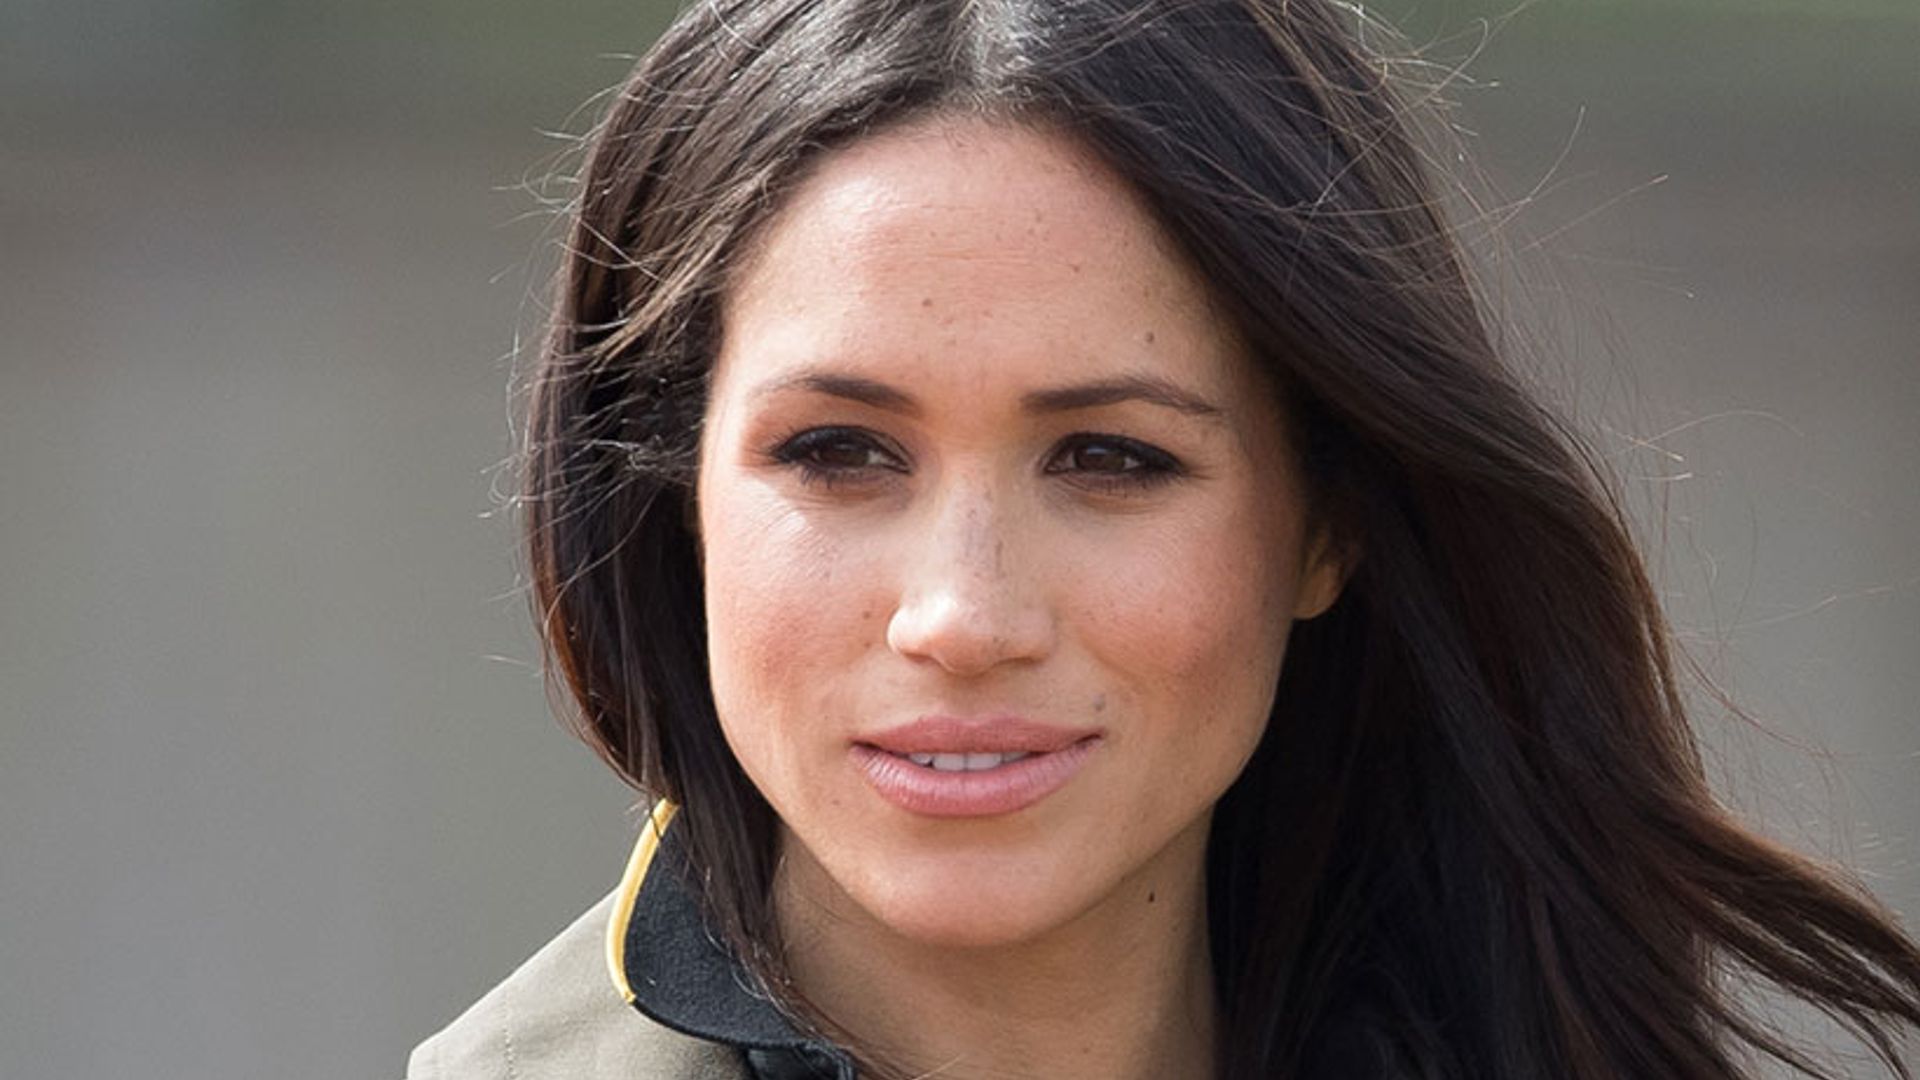 Meghan Markle spending the weekend in Chicago: see what she's up to ...